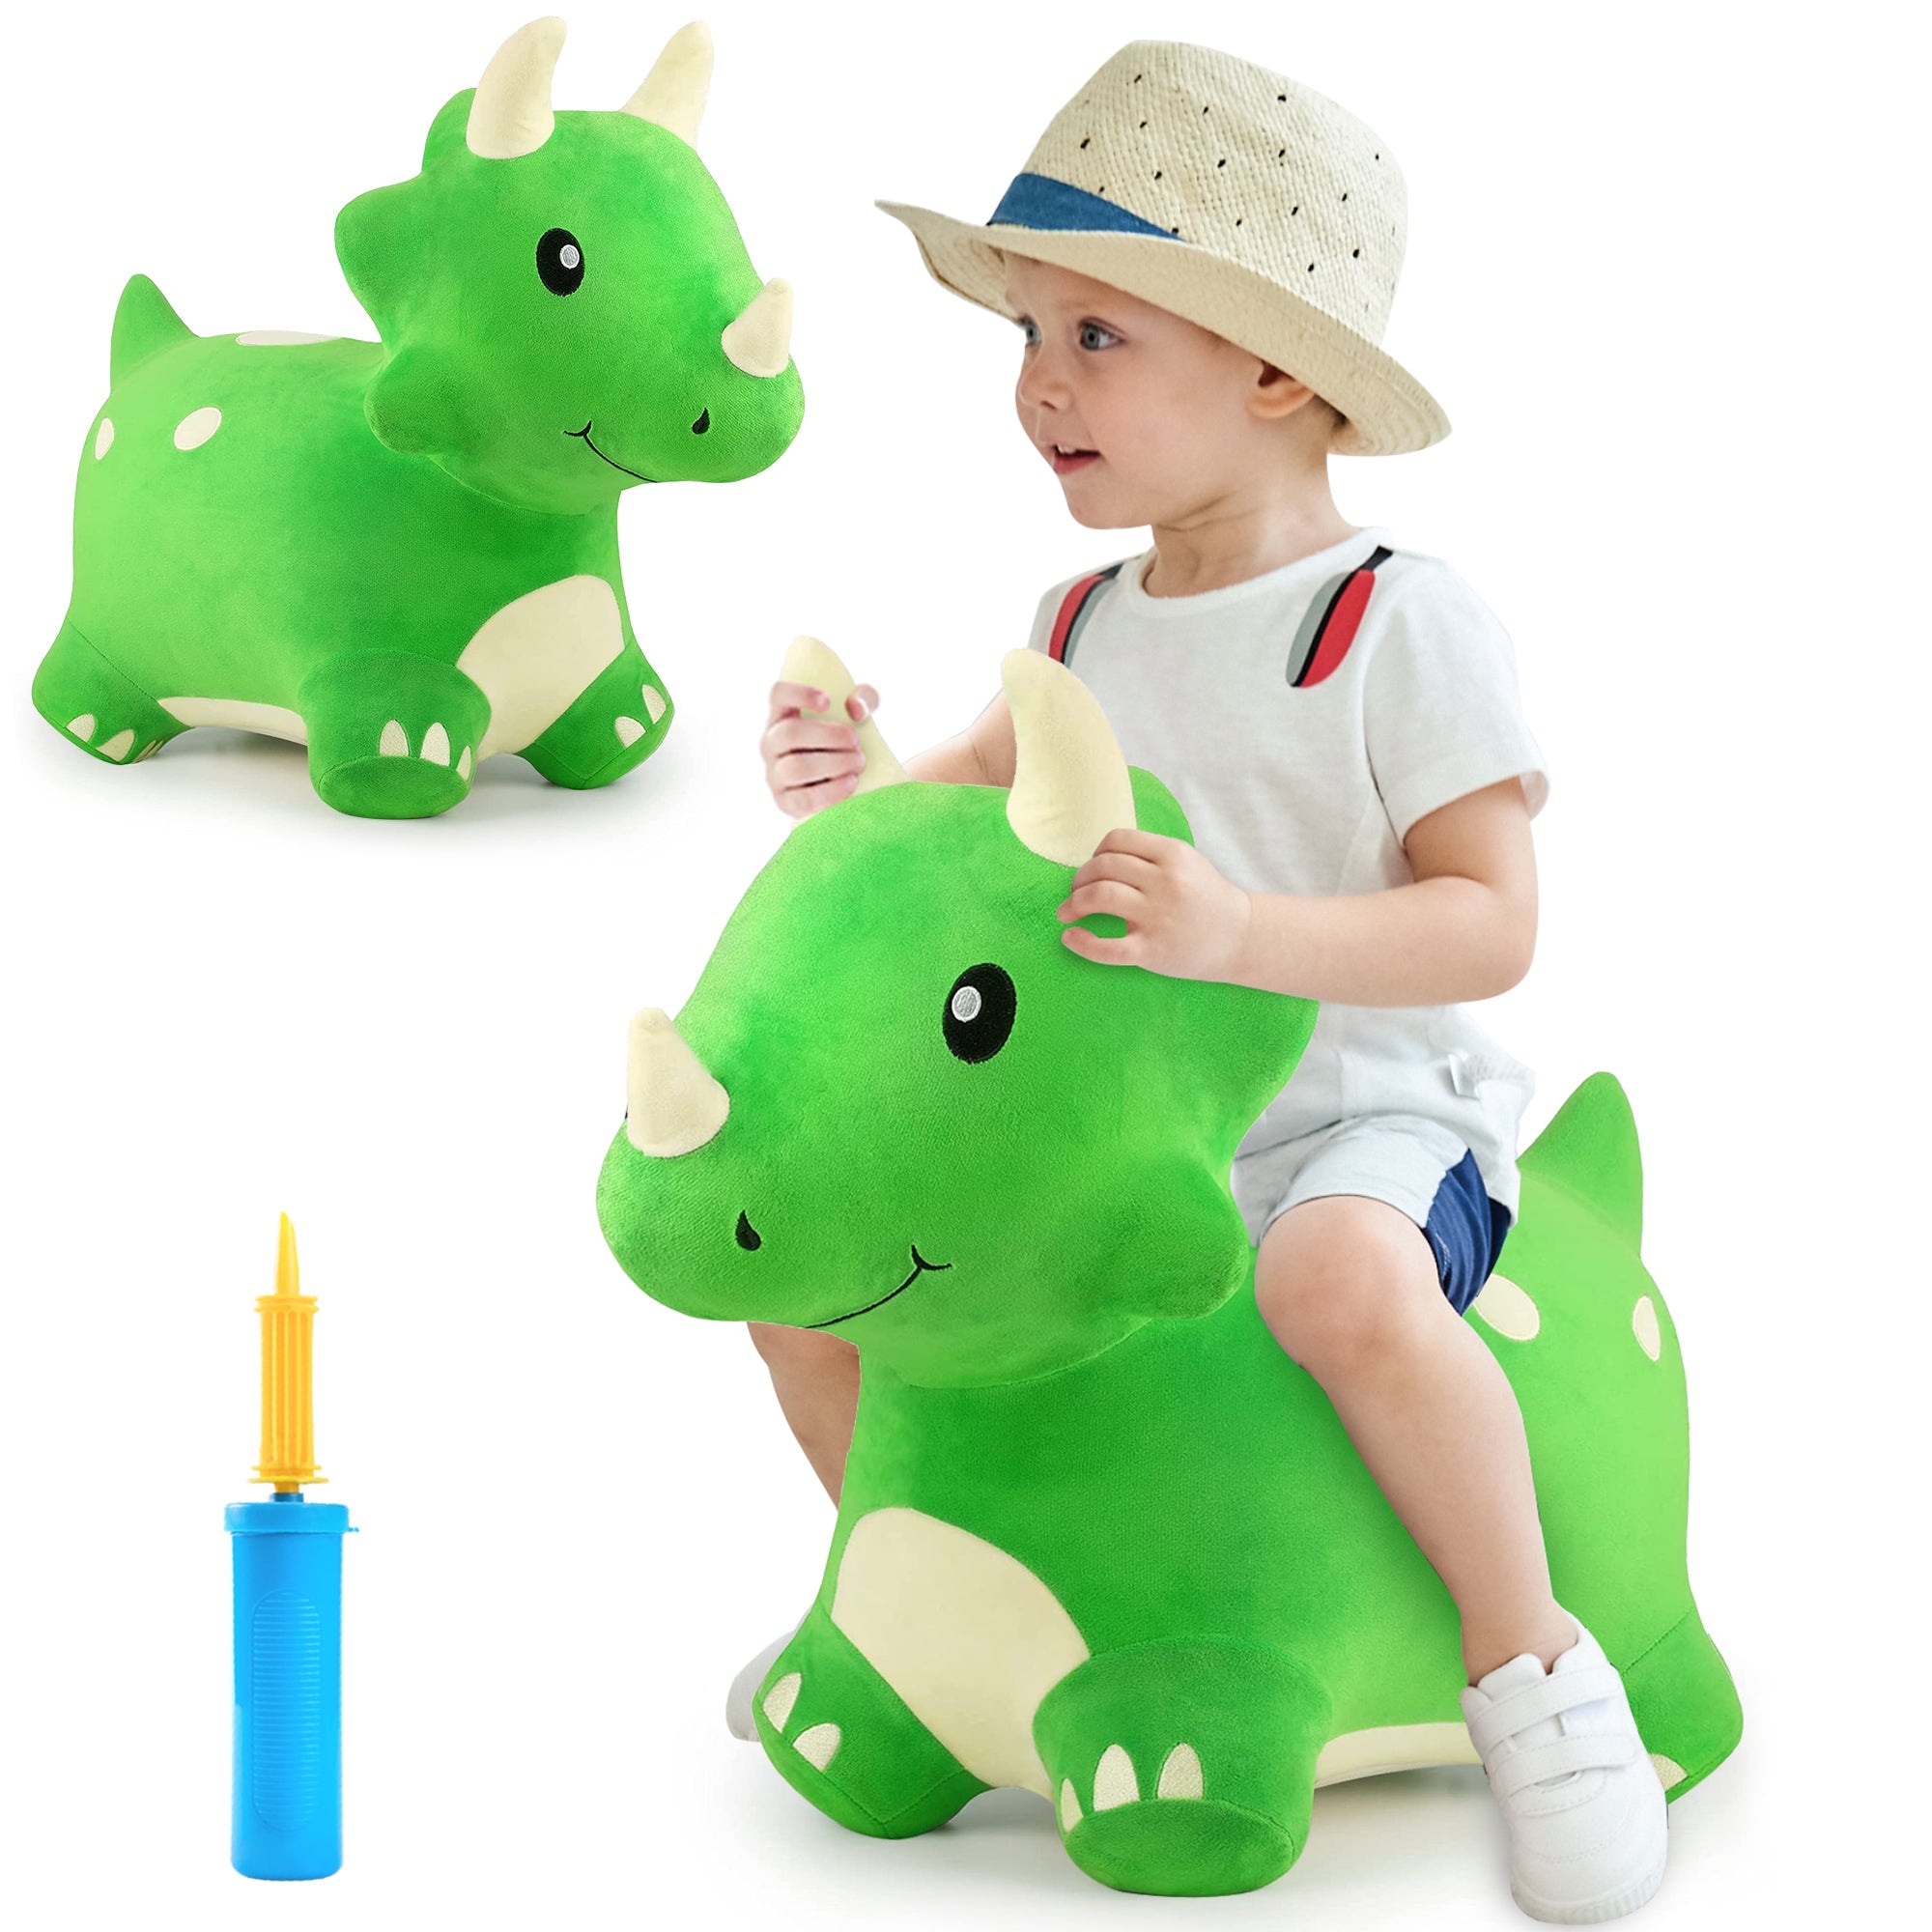 iPlay iLearn Bouncy Pals Kids Triceratops Dinosaur Hopper Ride on Toy